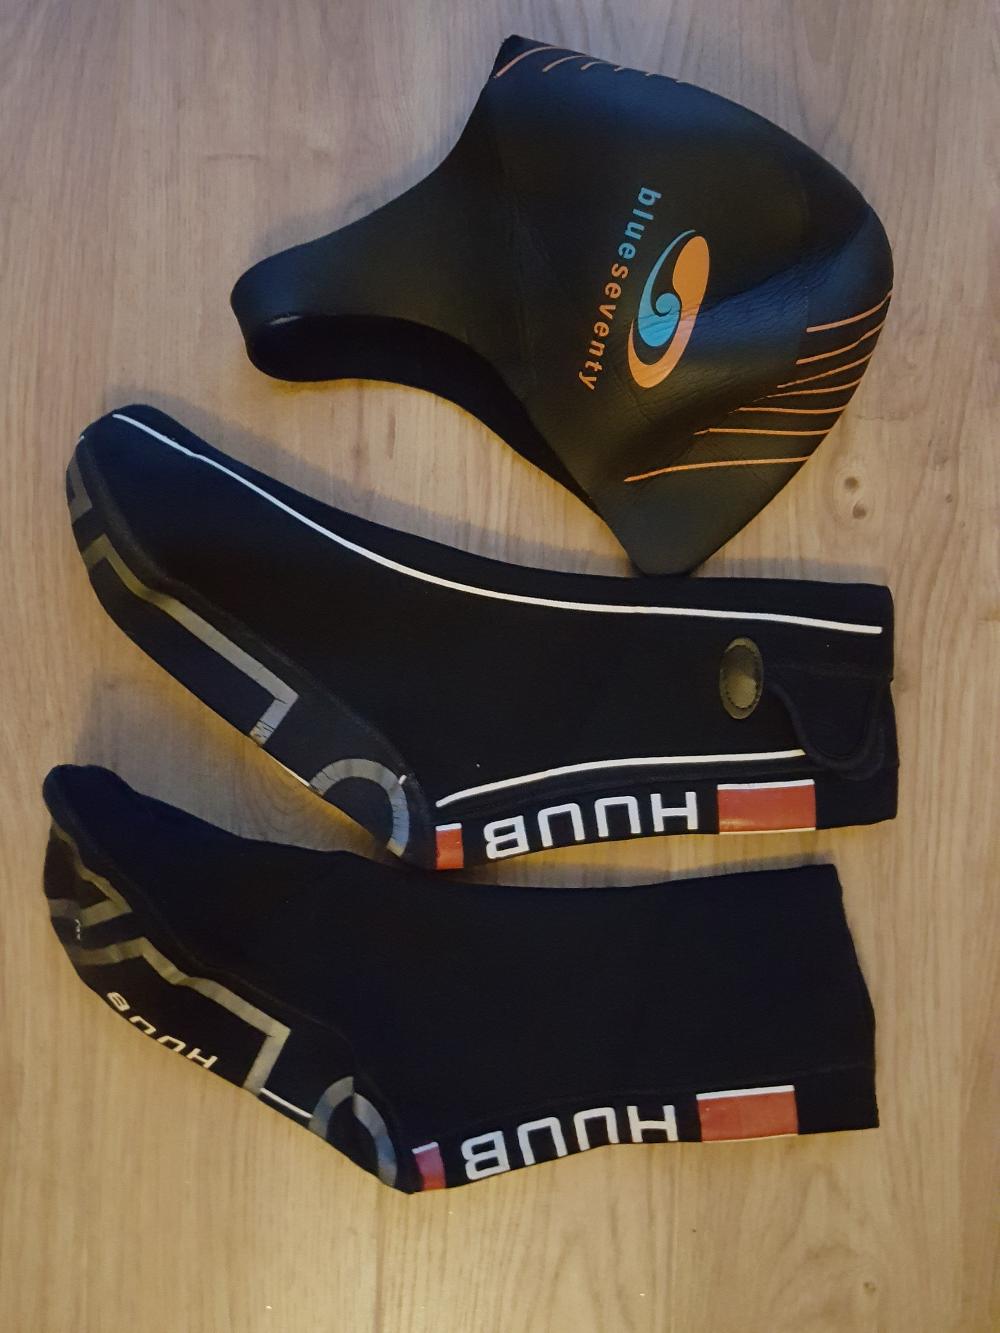 Neoprene socks and hat for sea swimming in the colder months